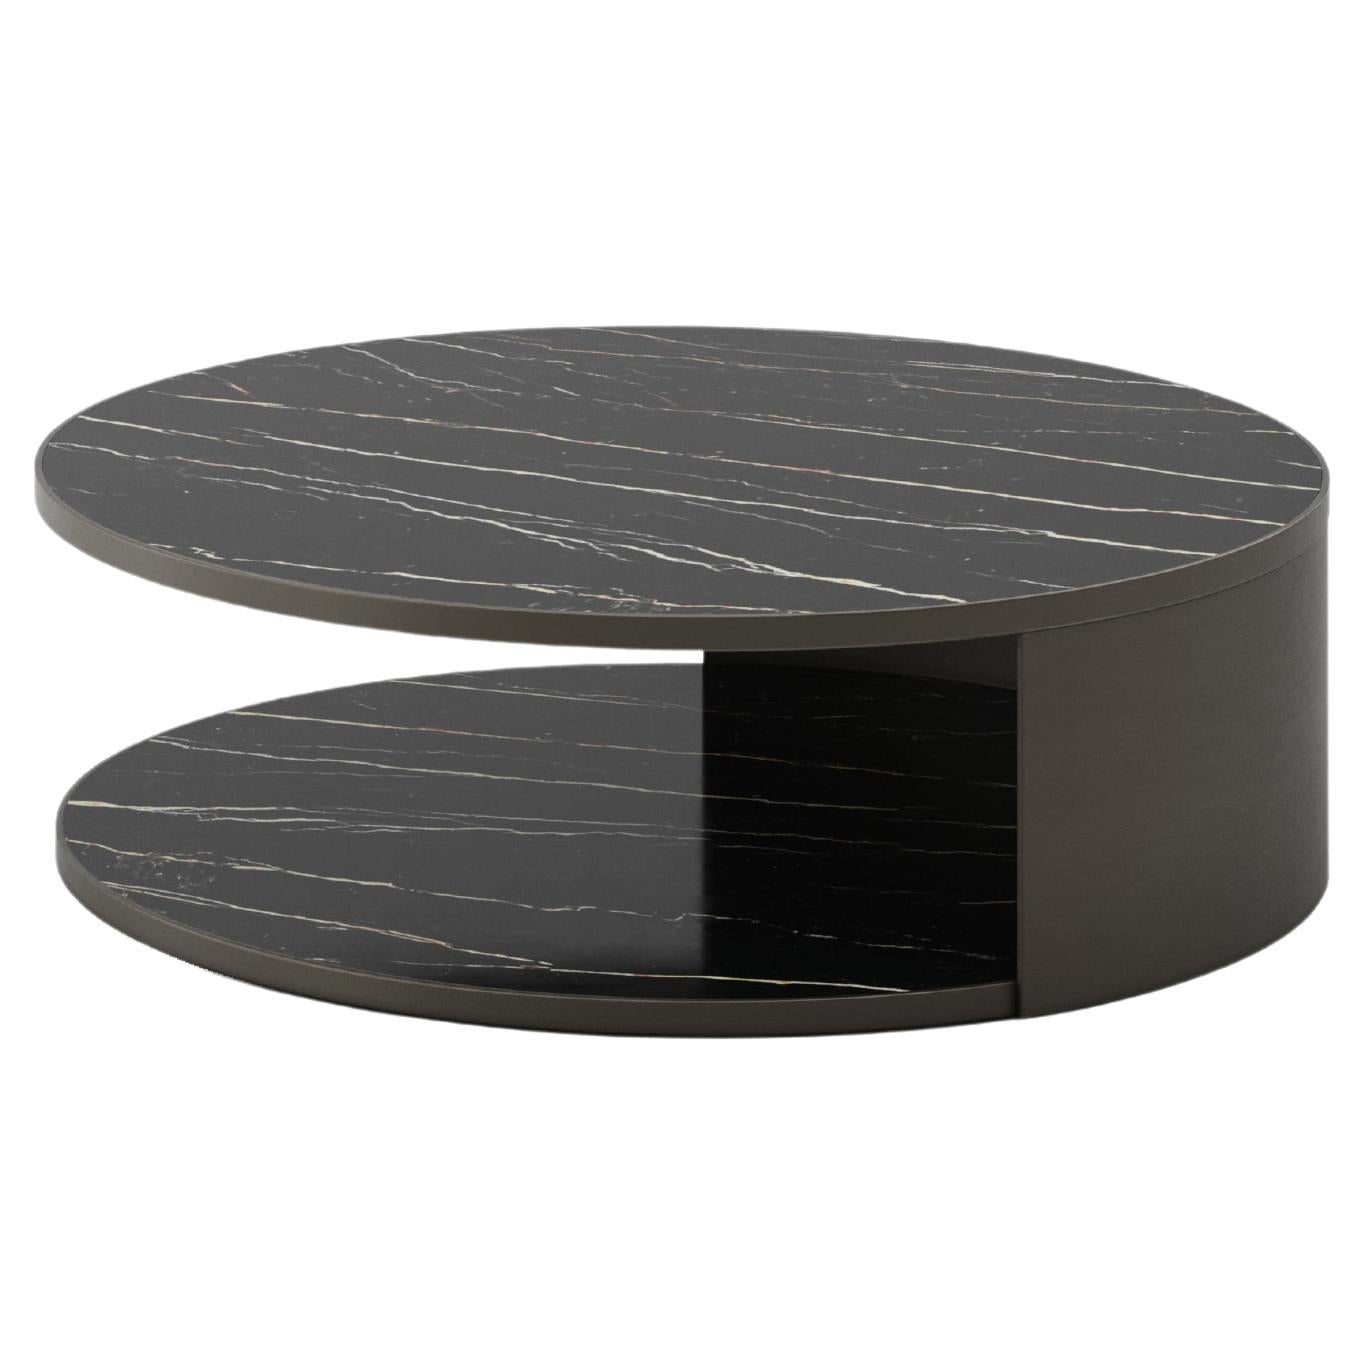 ZAGAS Aura Low Coffee Table For Sale